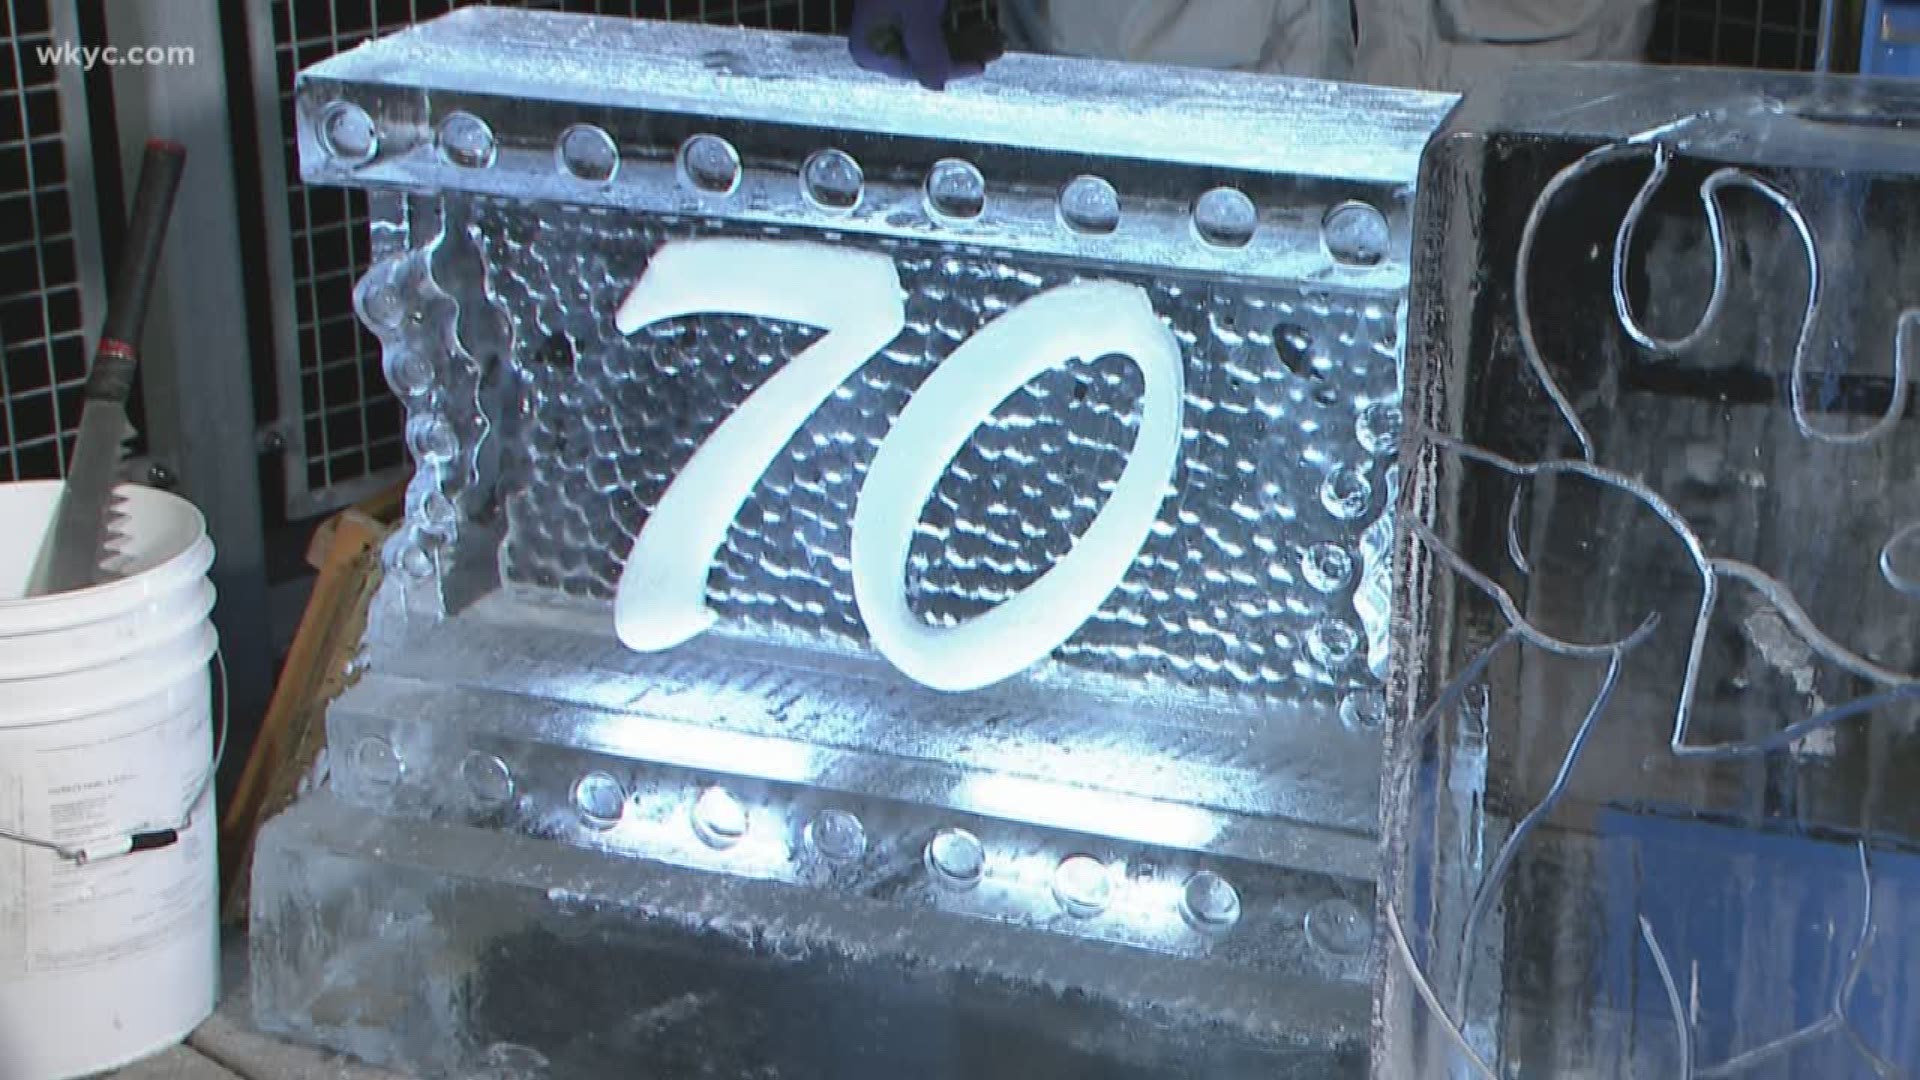 Dec. 5, 2018: In honor of WKYC's 70th anniversary, Elegant Ice Creations sculpted some beautiful art on our own back deck.